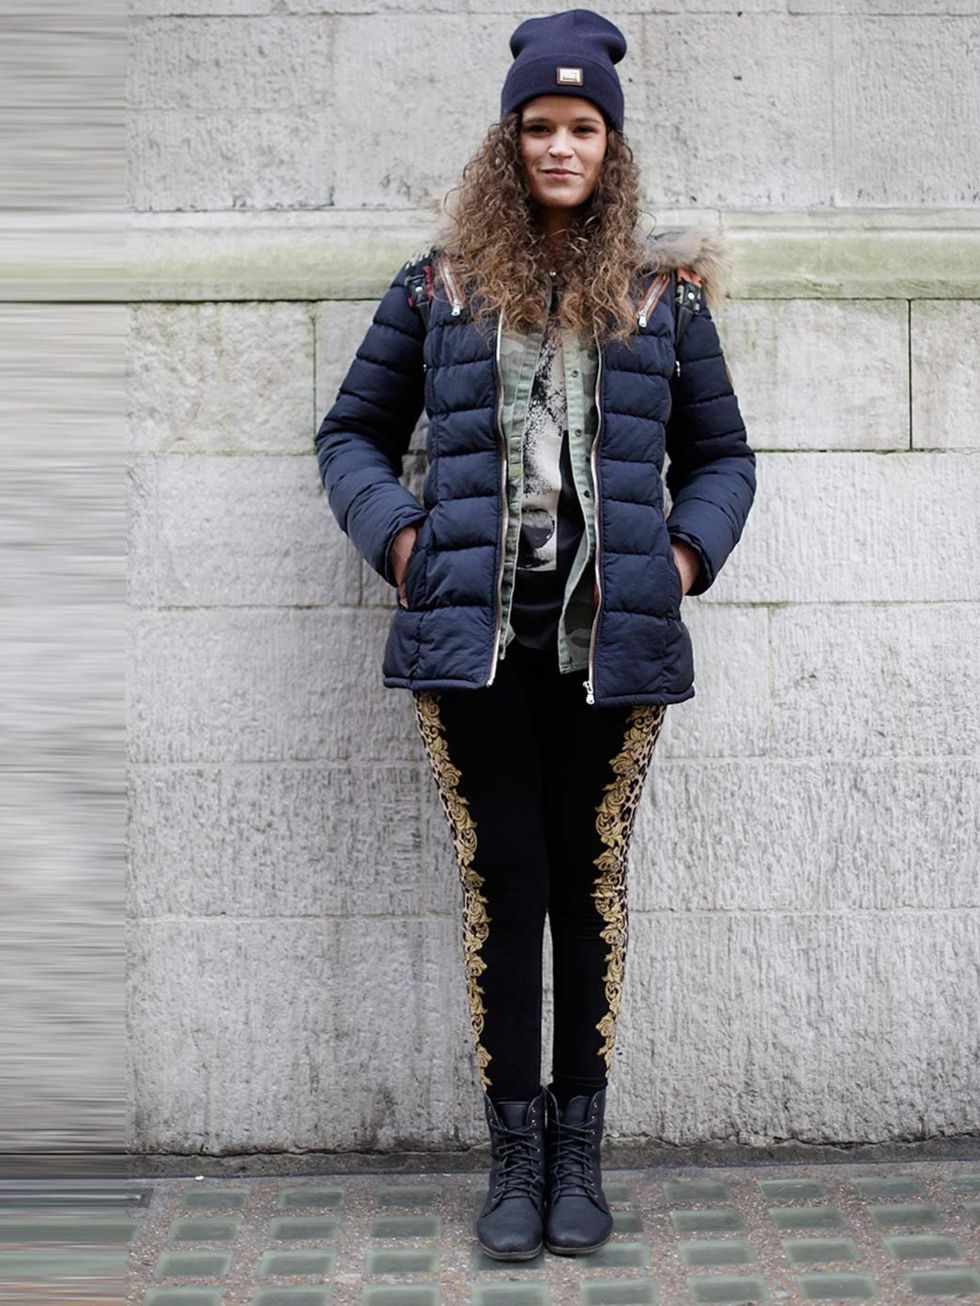 <p>Nina, 25, Student. Jacket and boots from Paris, Forever 21 shirt and leggings, Zara t-shirt, Supreme hat.</p>